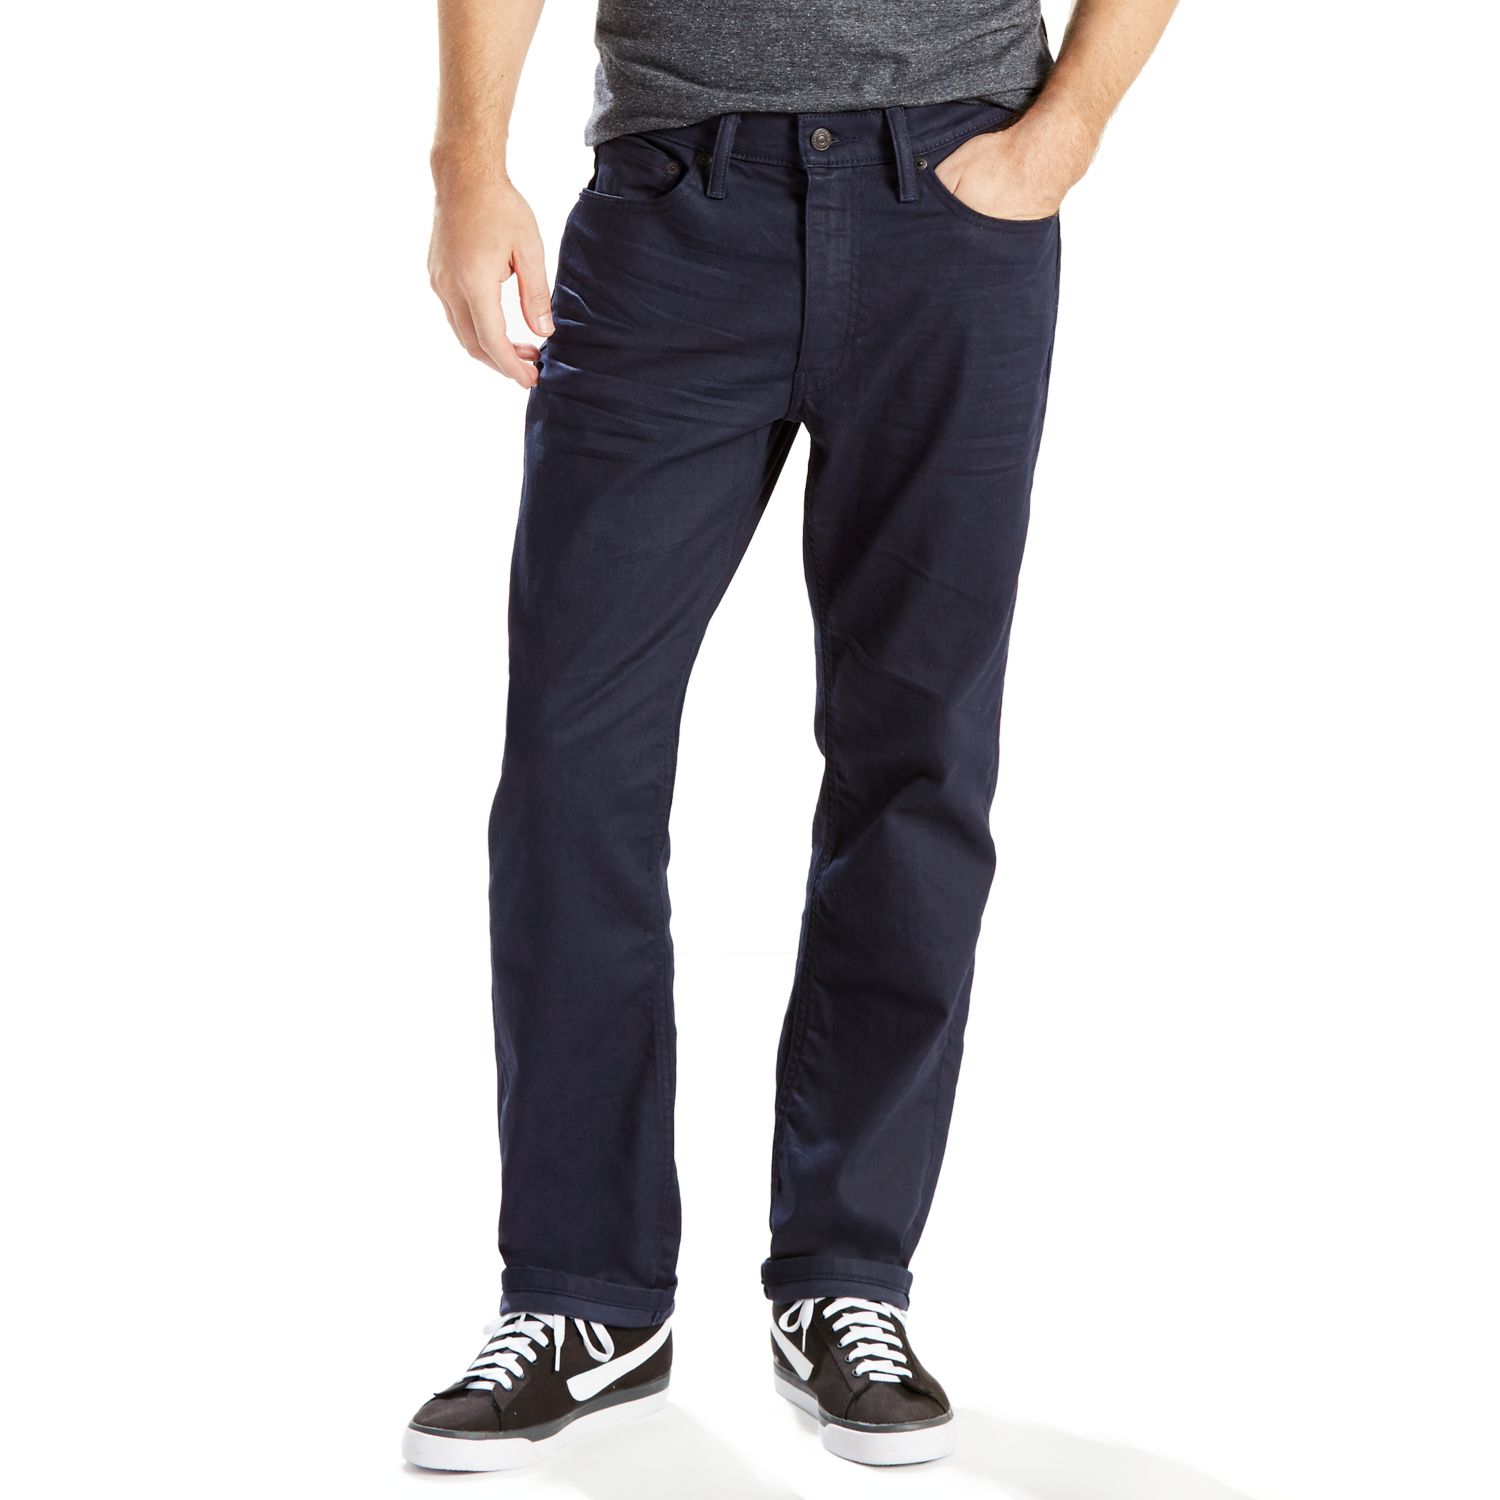 541™ Athletic Fit Stretch Jeans